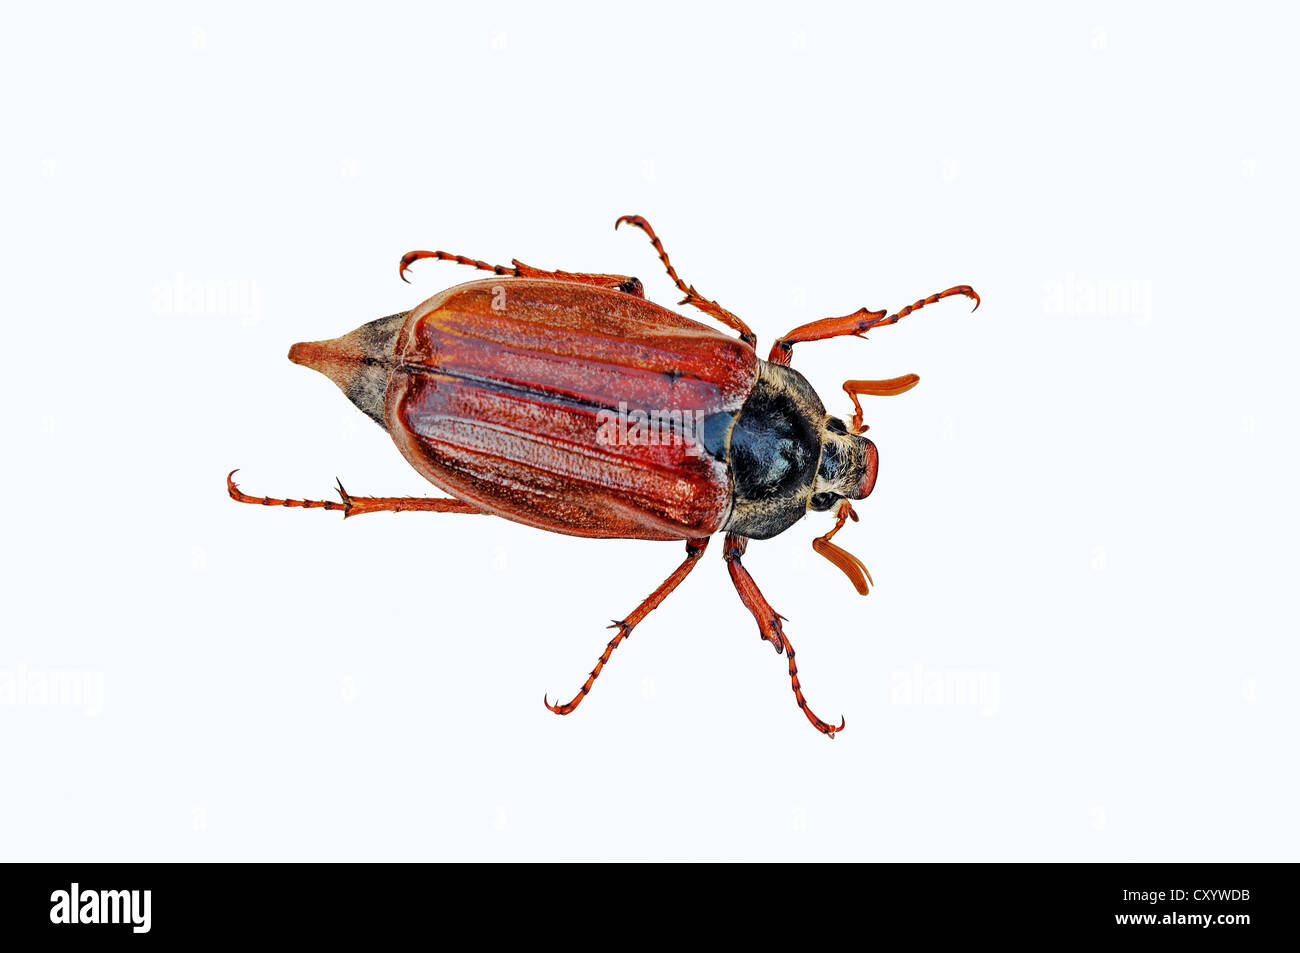 Common cockchafer or may bug (Melolontha melolontha) Stock Photo